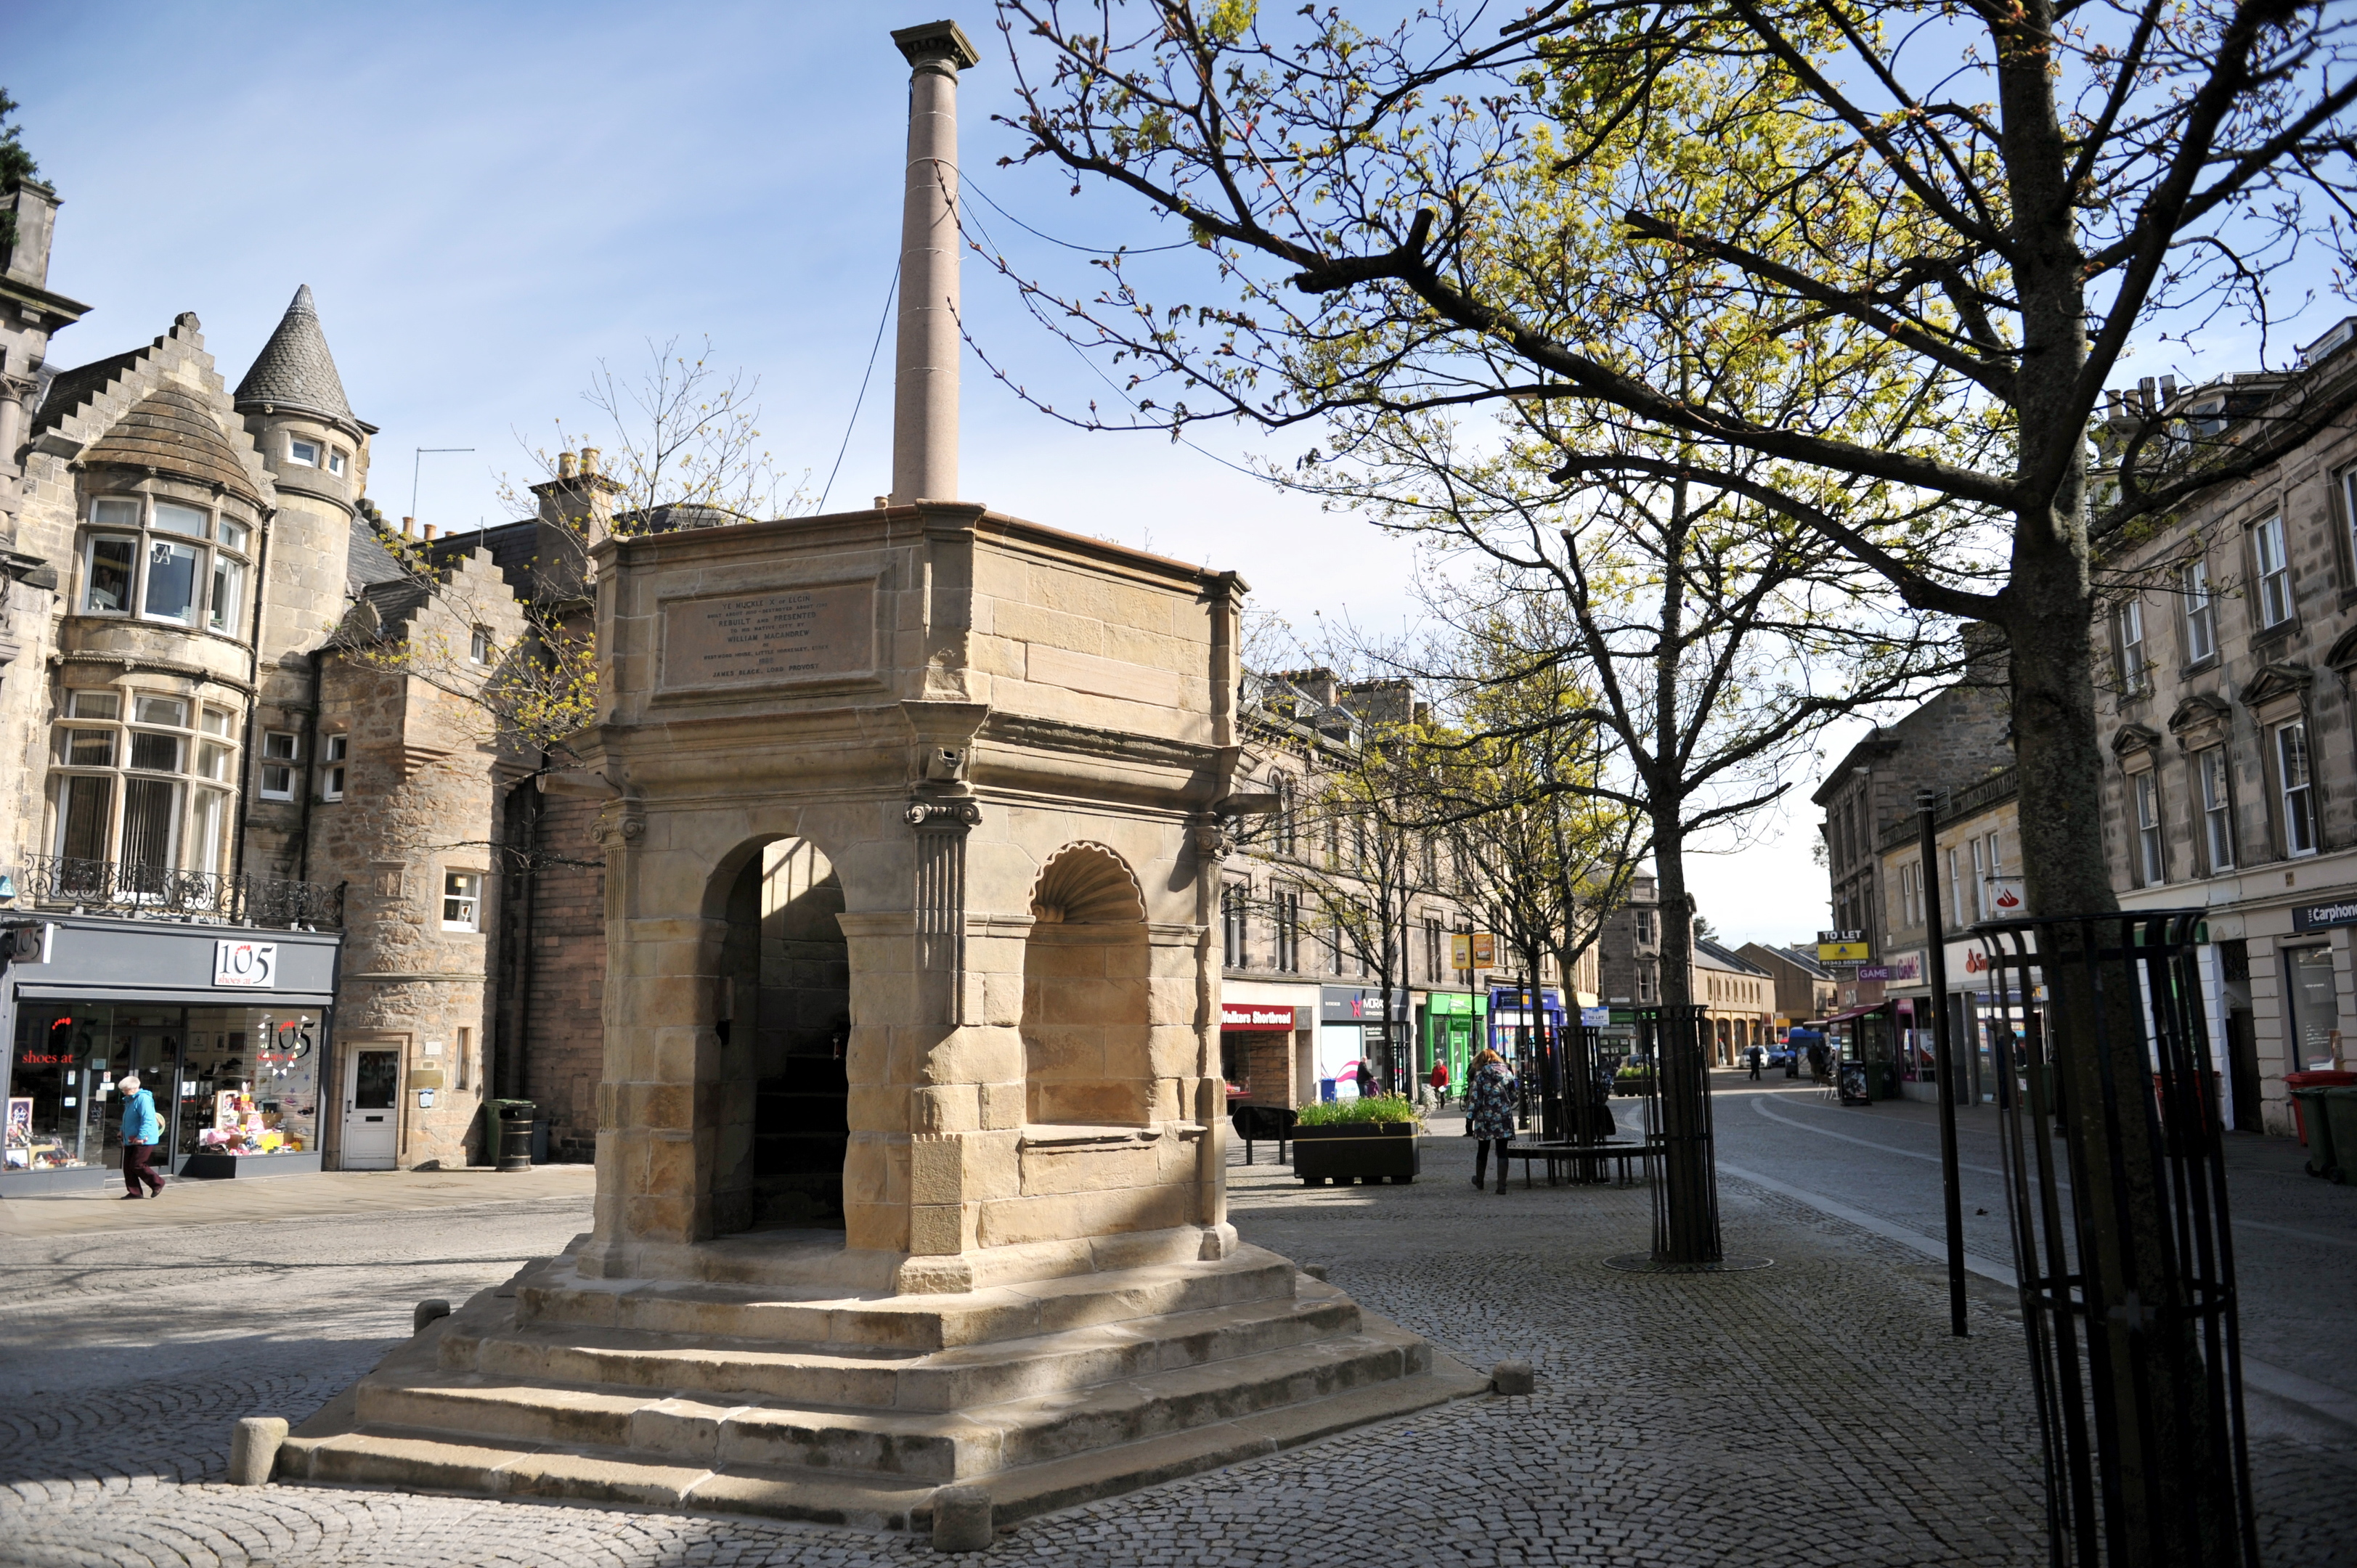 The Muckle Cross in Elgin was refurbished as part of the projects.